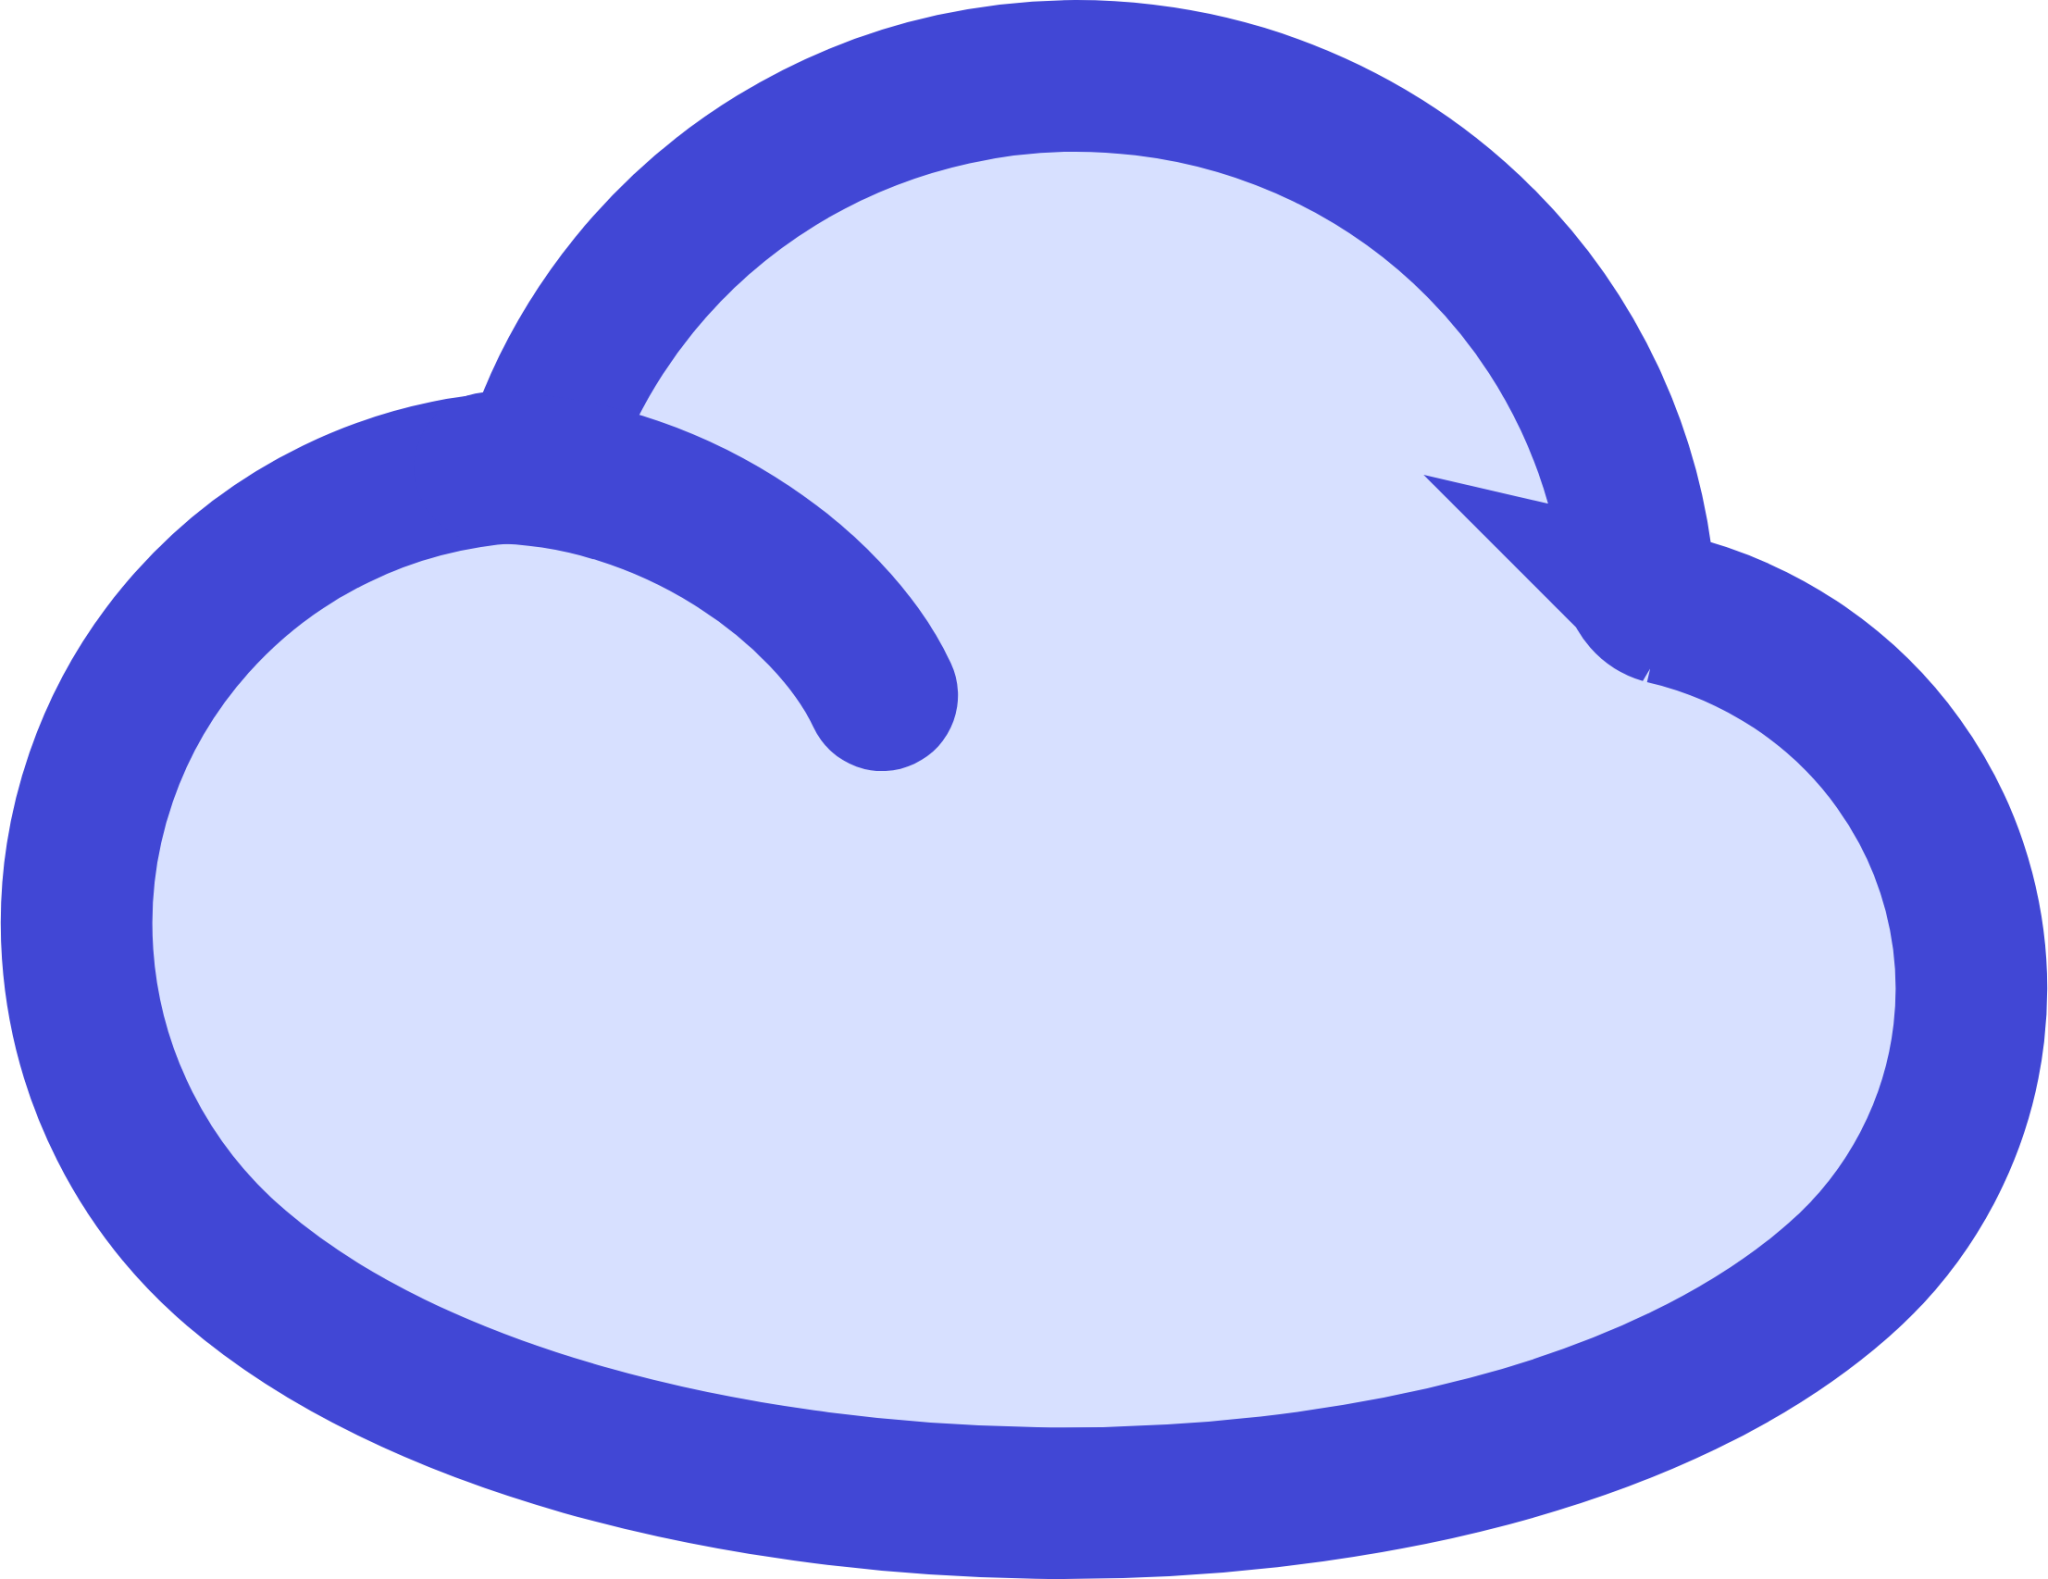 weather cloud 1 icon